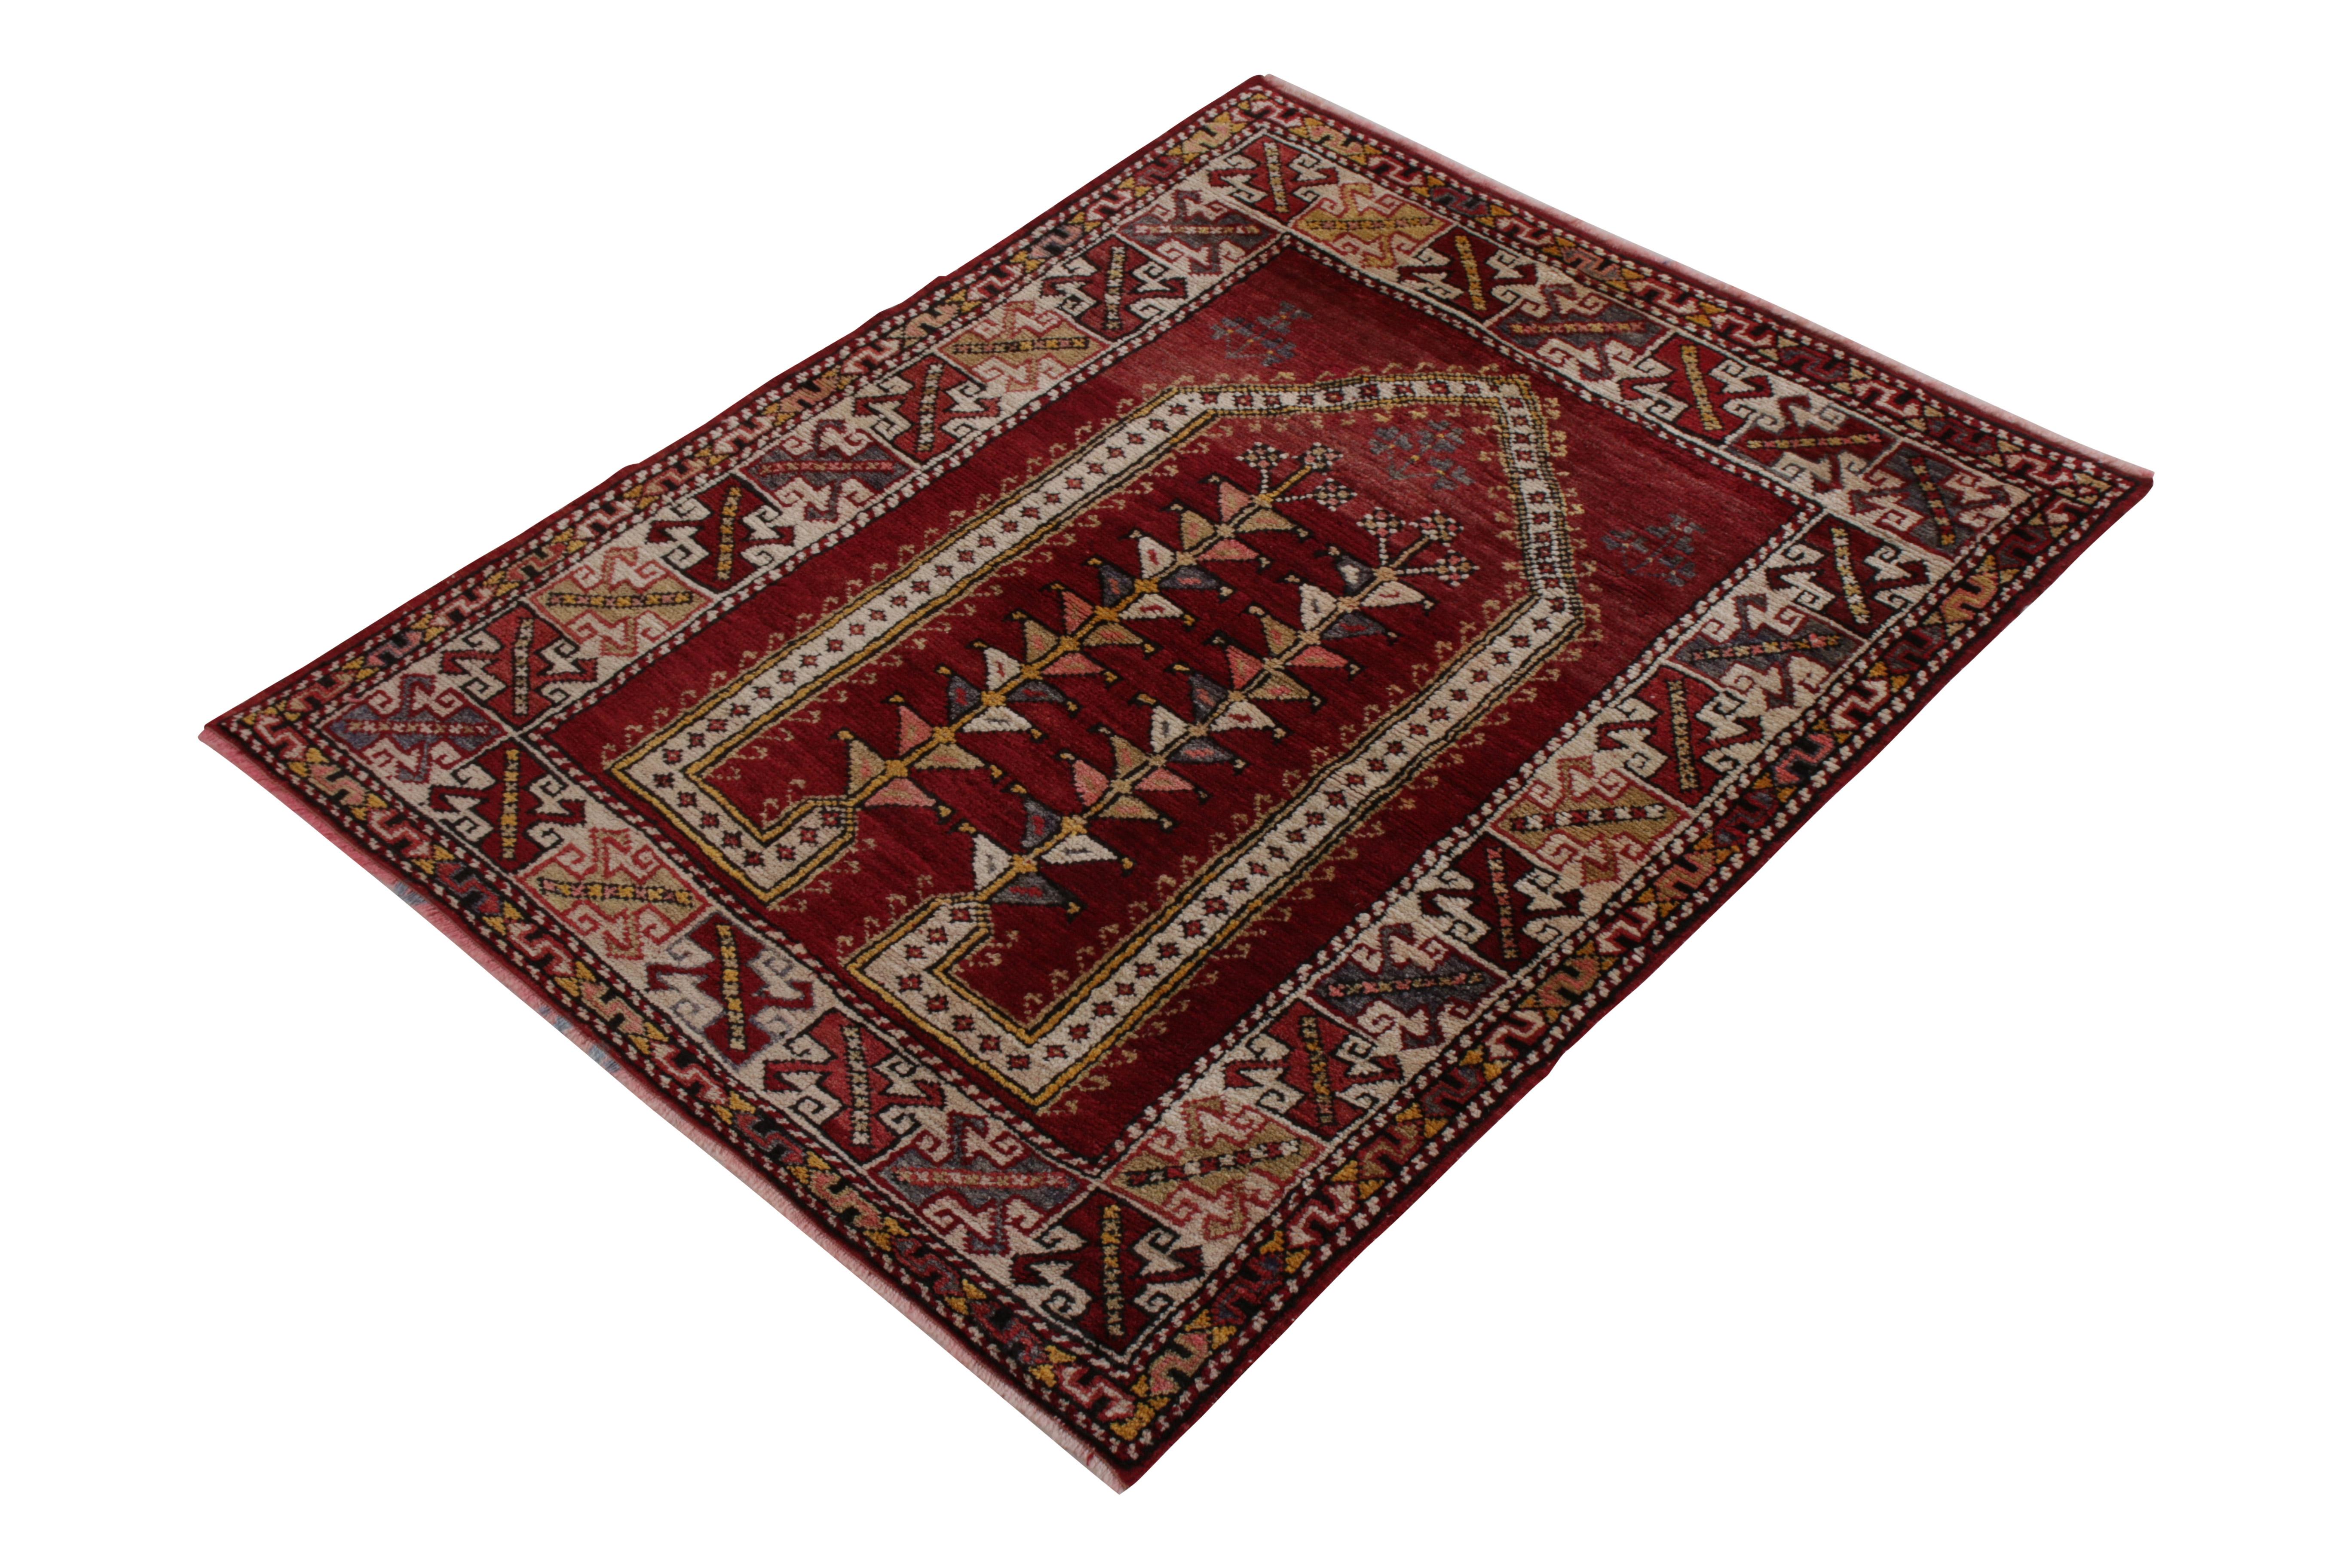 A 3 x 4 vintage rug of Ghiordes design, hand knotted in wool originating from Turkey, circa 1950-1960. Enjoying rich red and gold beside playful accents highlighting the classic mihrab pattern with movement and grace. In good condition for its age